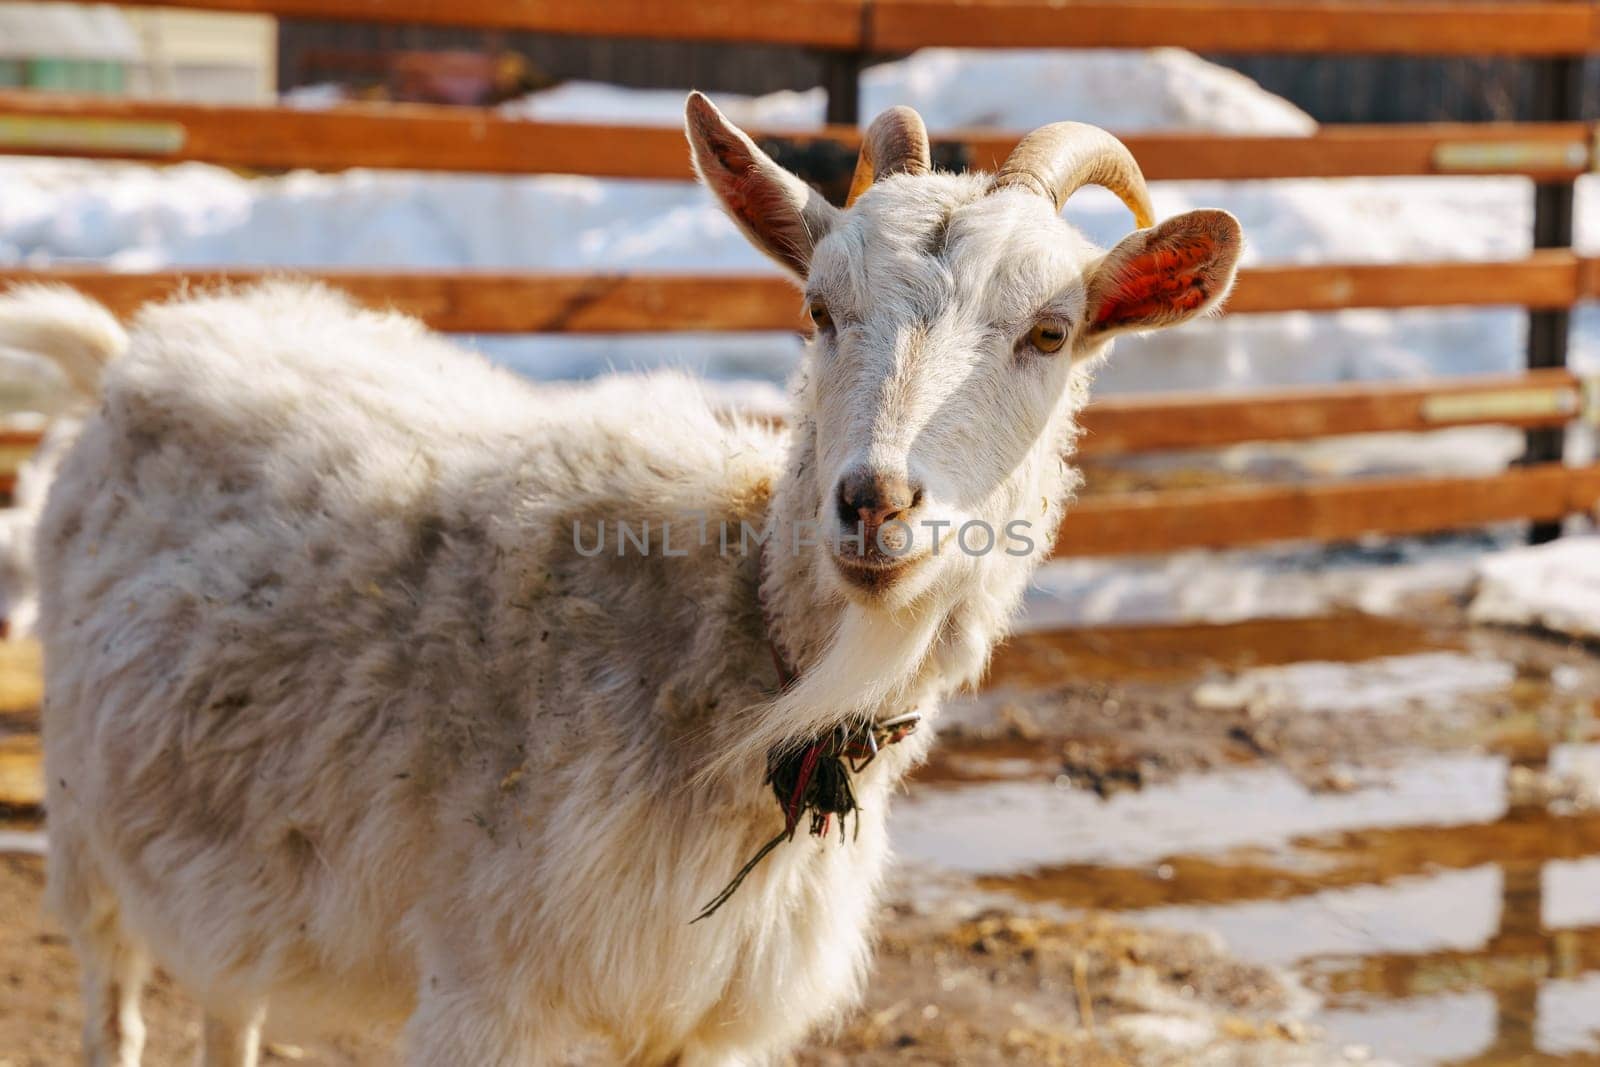 Goat on farm look peaceful and content in their enclosed environment. Selective focus. by darksoul72